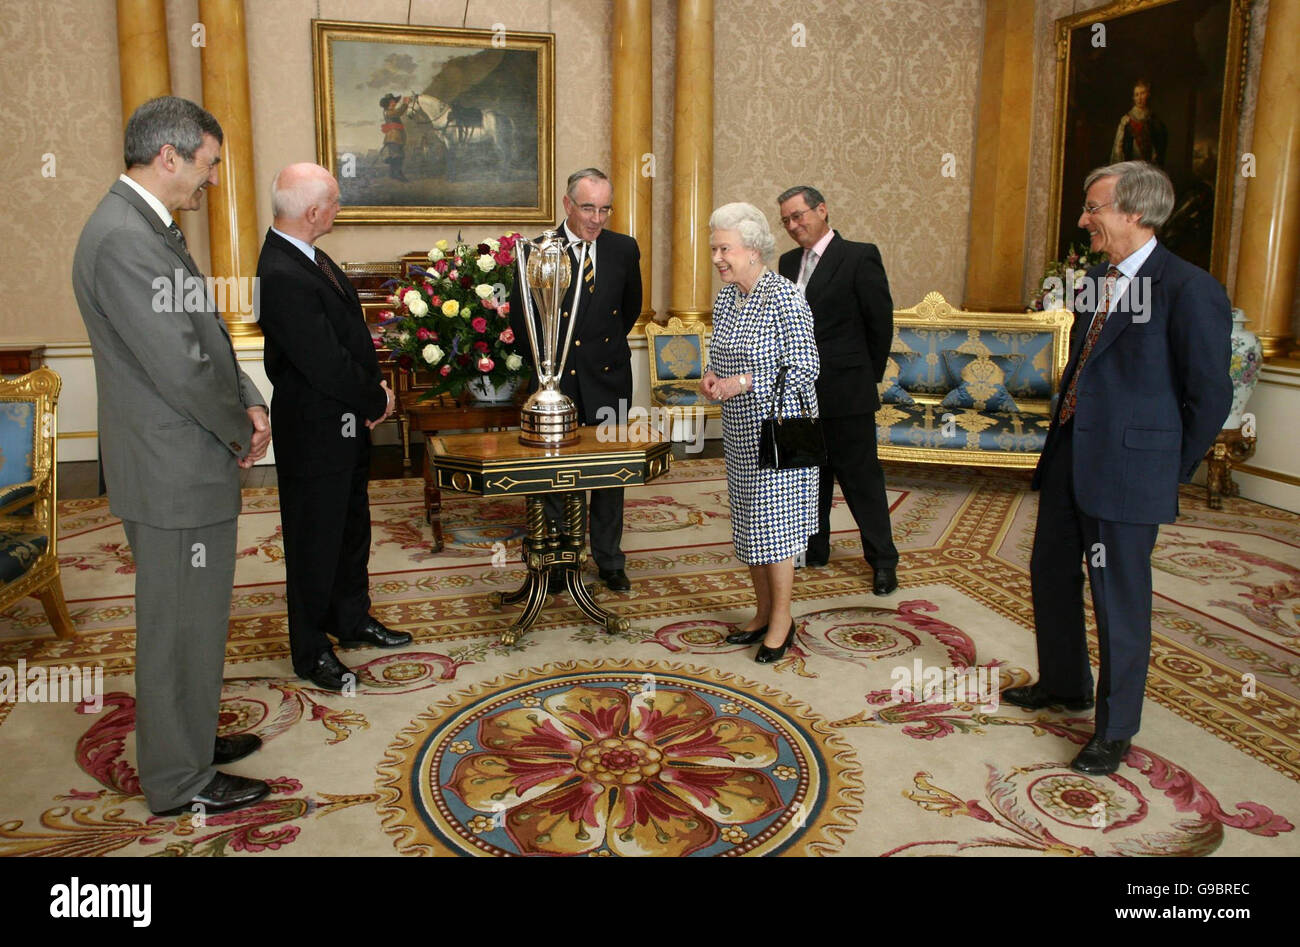 Britain's Queen Elizabeth II greets a delegation from Henley Royal Regatta, at Buckingham Palace, in central London. The delegation, led by Sir Richard Sykes (far right), was presented with The Prince Albert Challenge Cup. Stock Photo